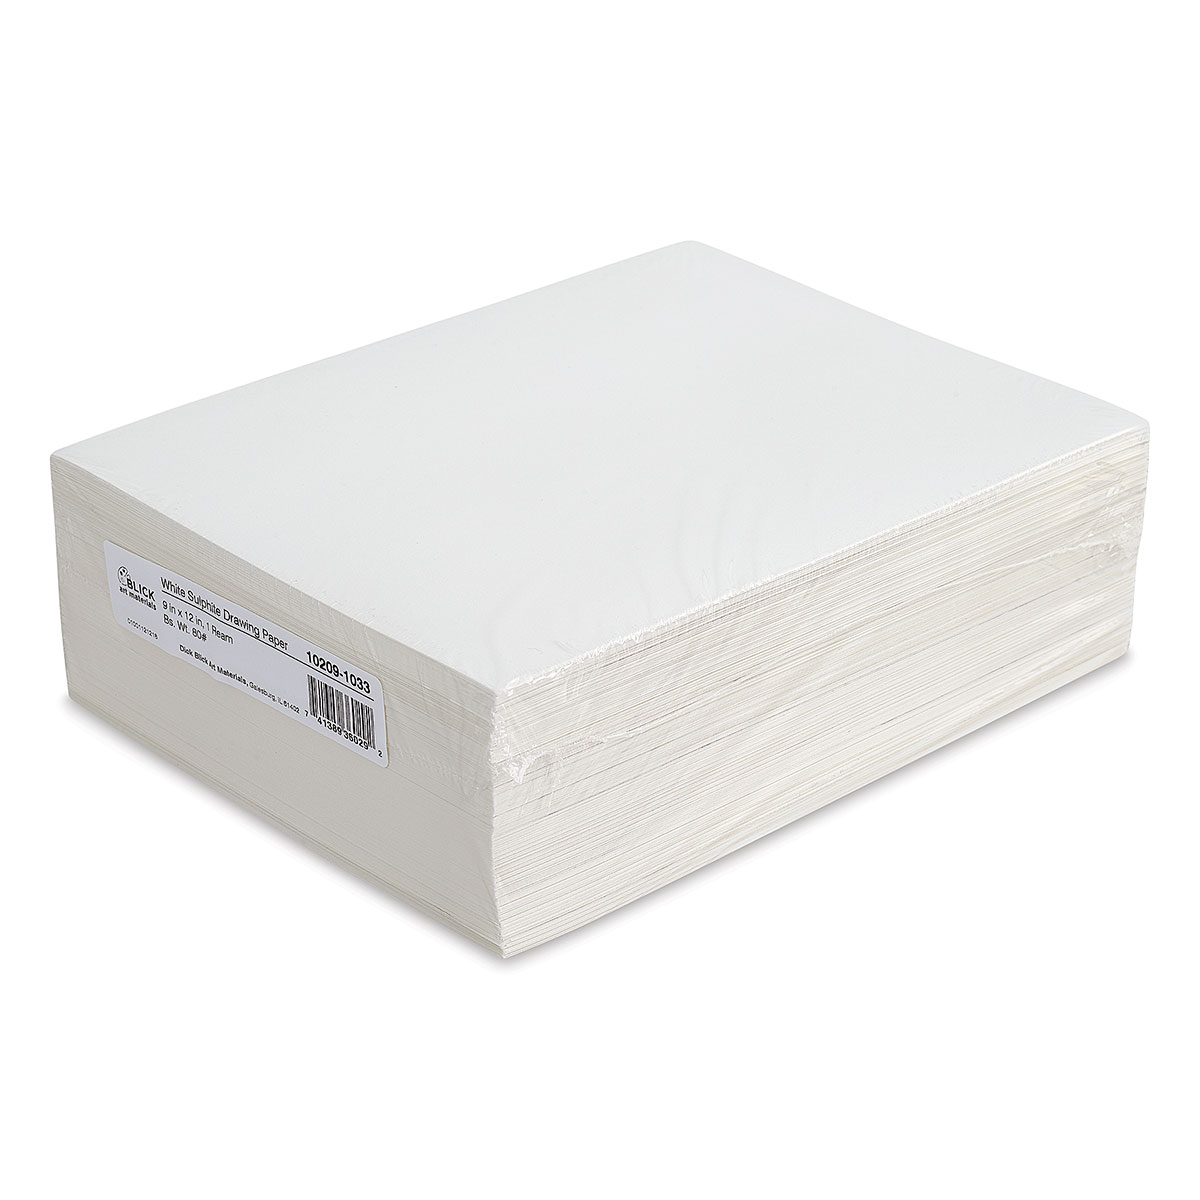 Sax Sulphite Drawing Paper, 50 lb, 18 x 24 Inches, Extra-White, Pack of 500